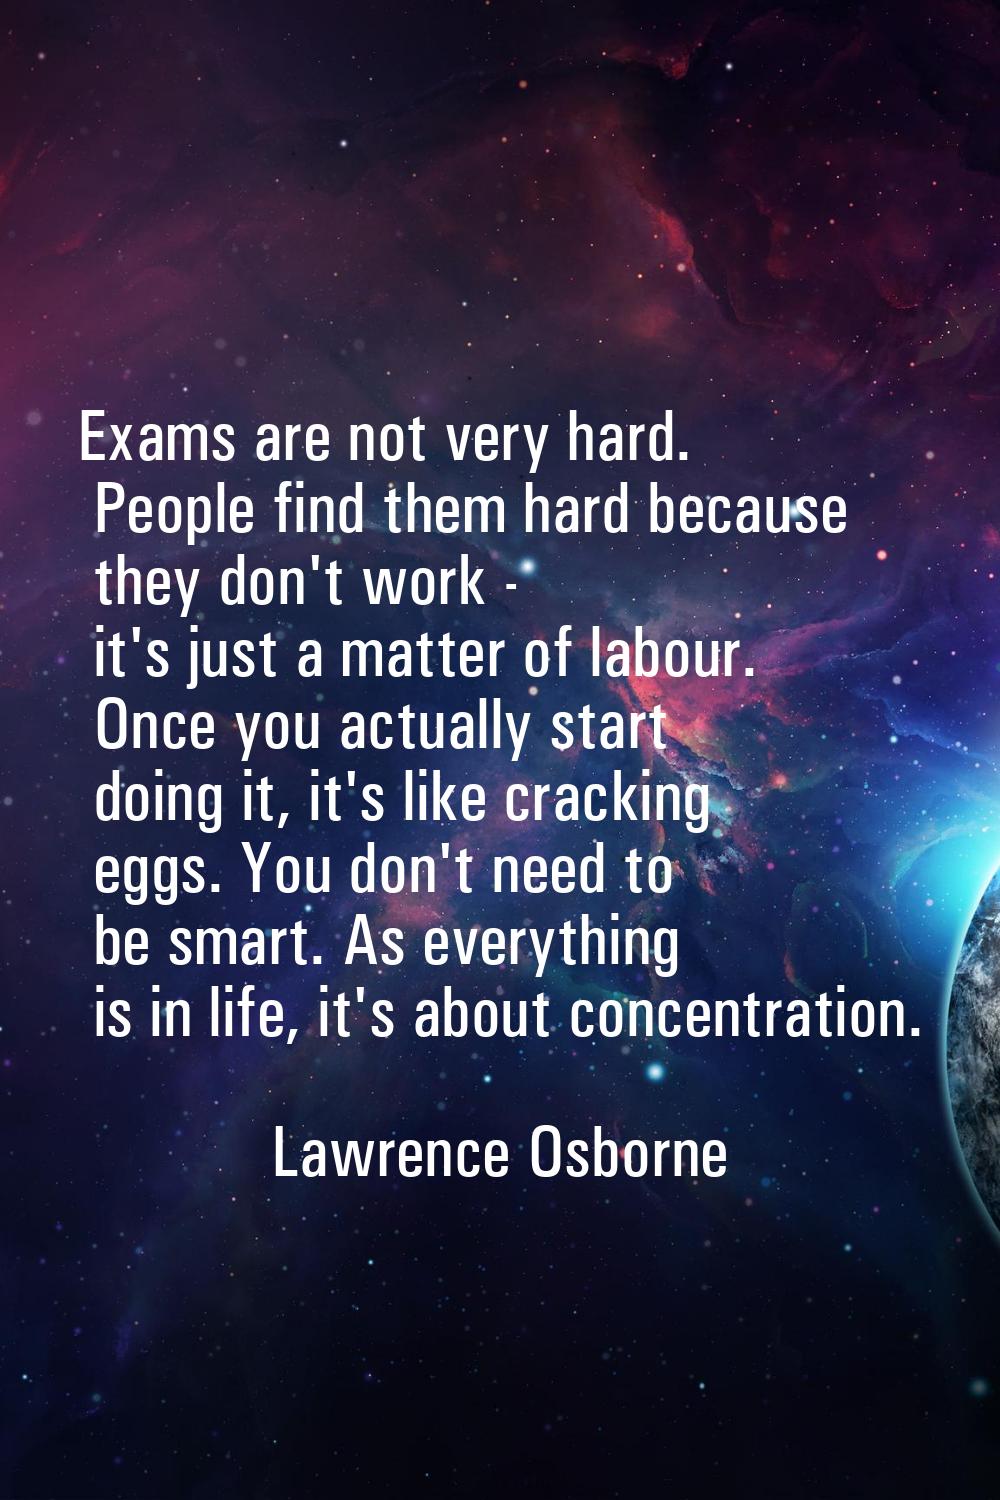 Exams are not very hard. People find them hard because they don't work - it's just a matter of labo